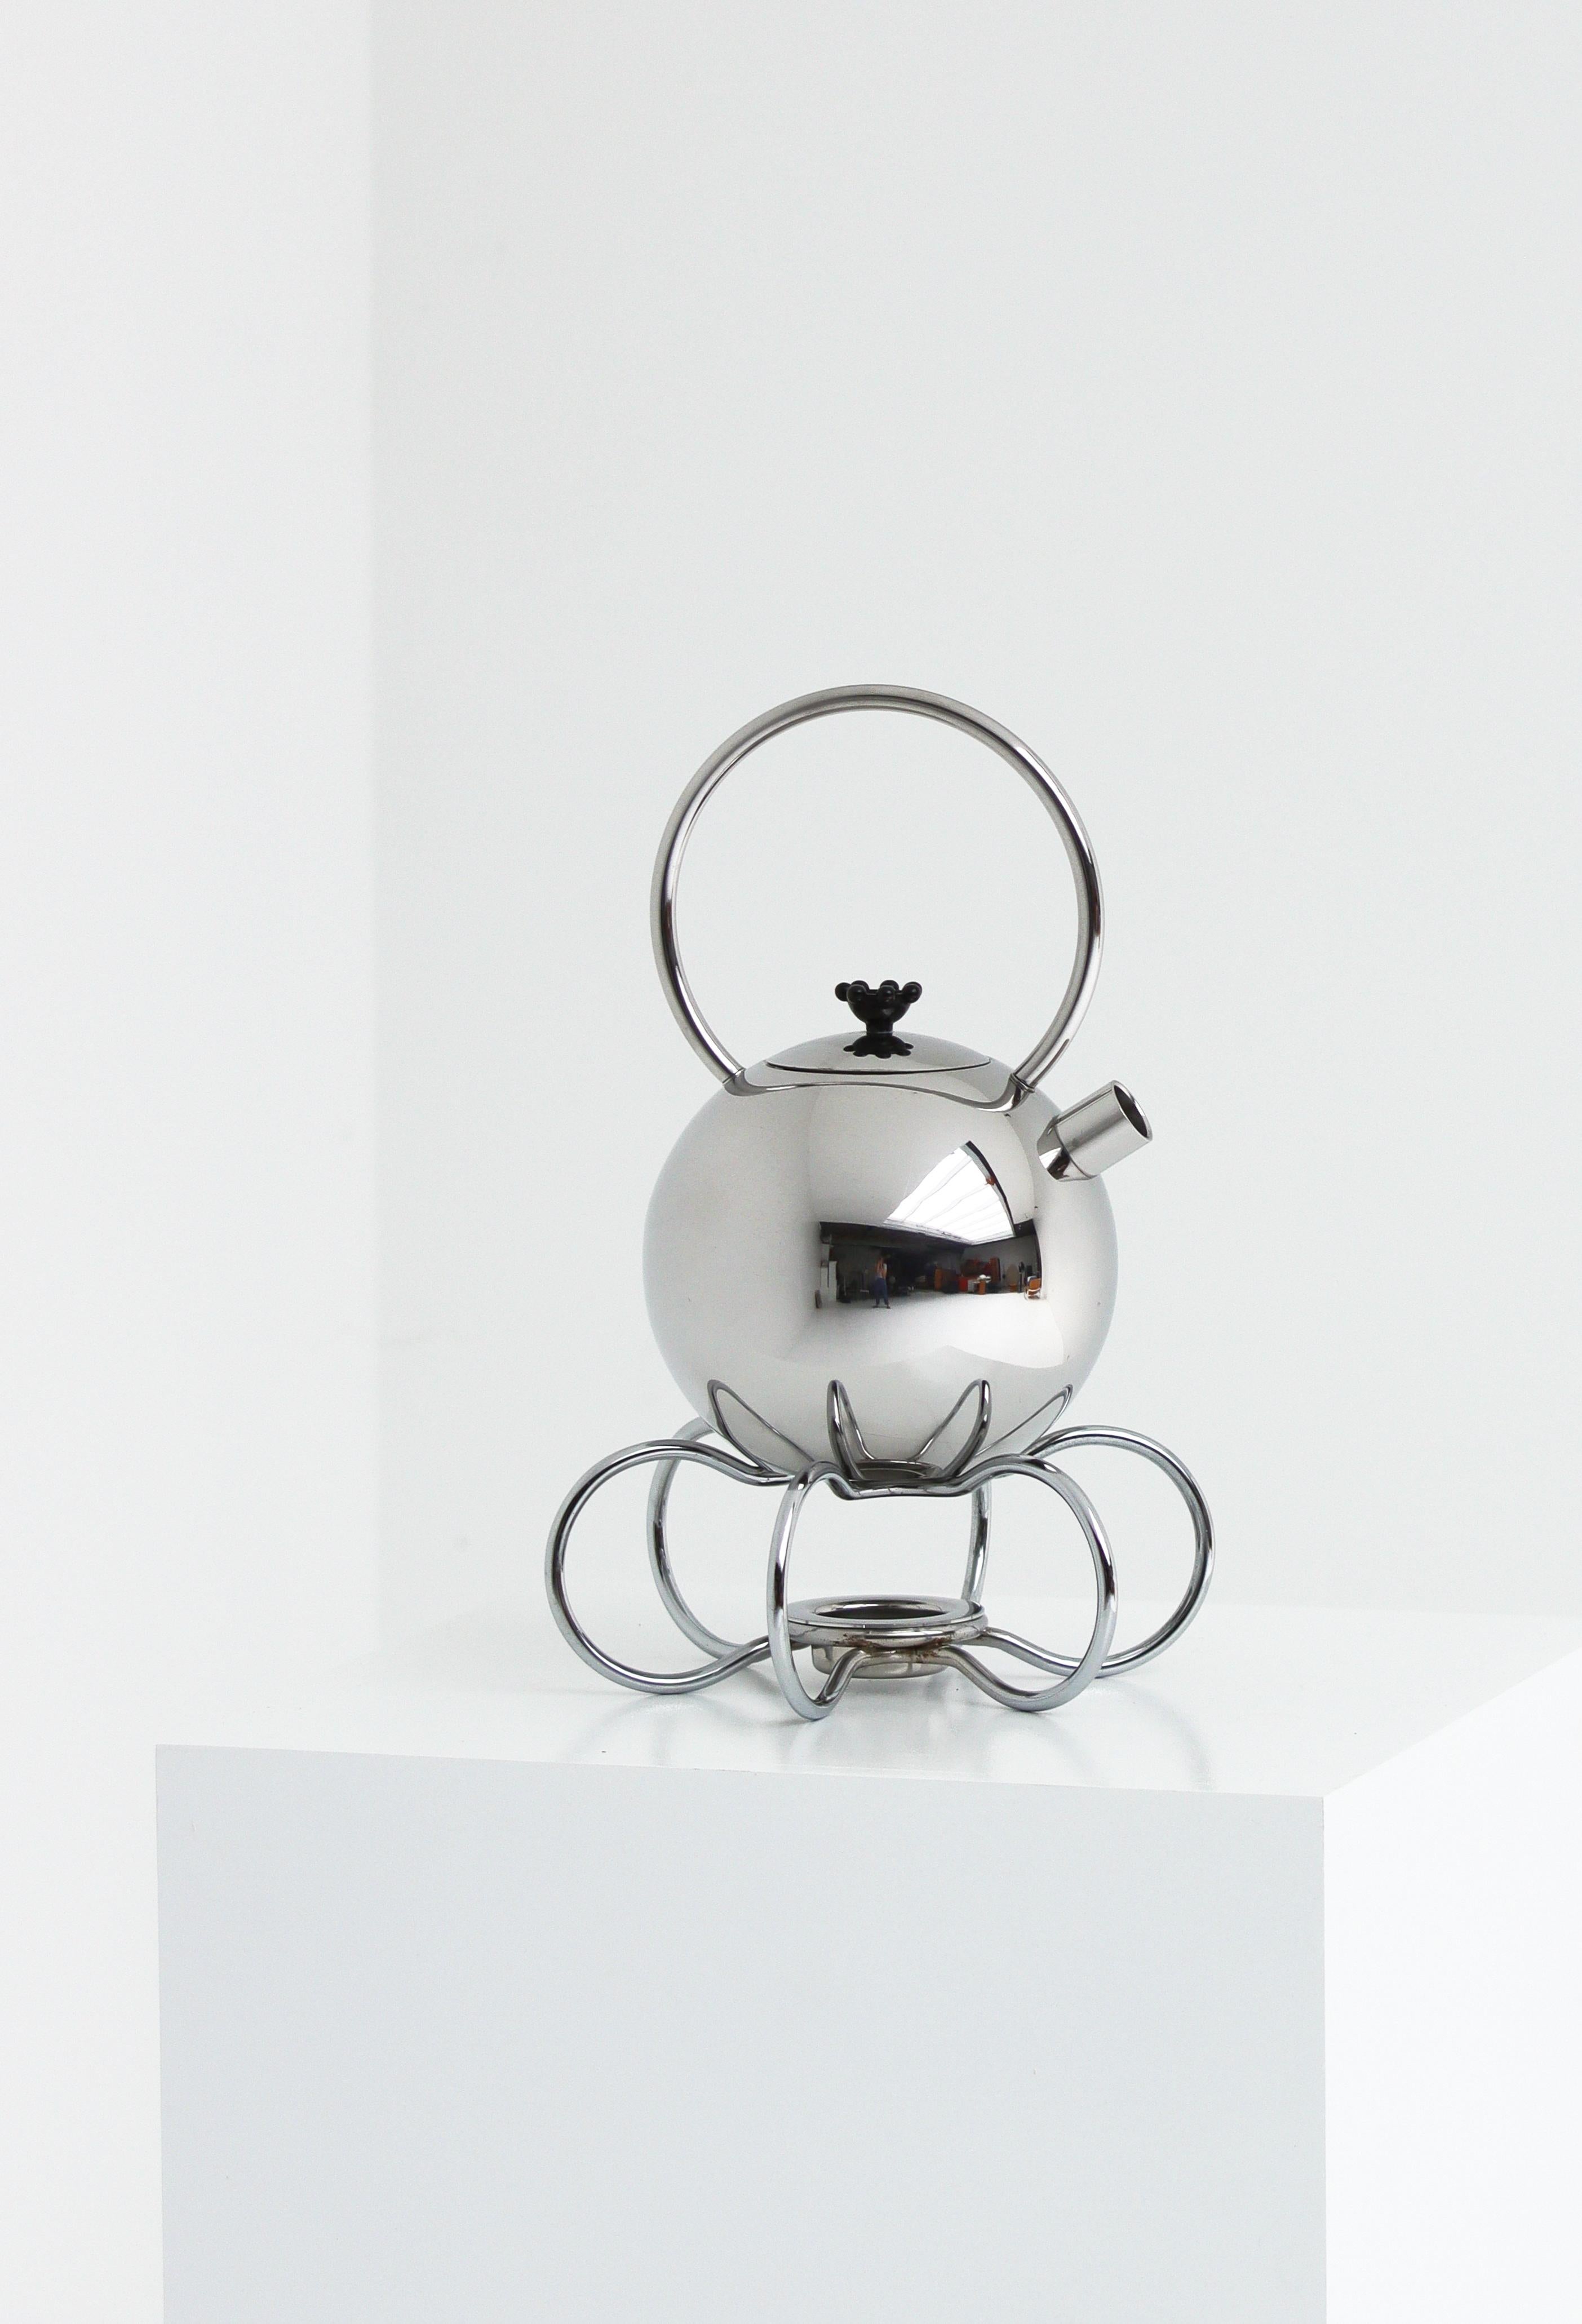 Midcentury modern chrome Teapot from the King Series of Wmf by Matteo Thun 1989 For Sale 1